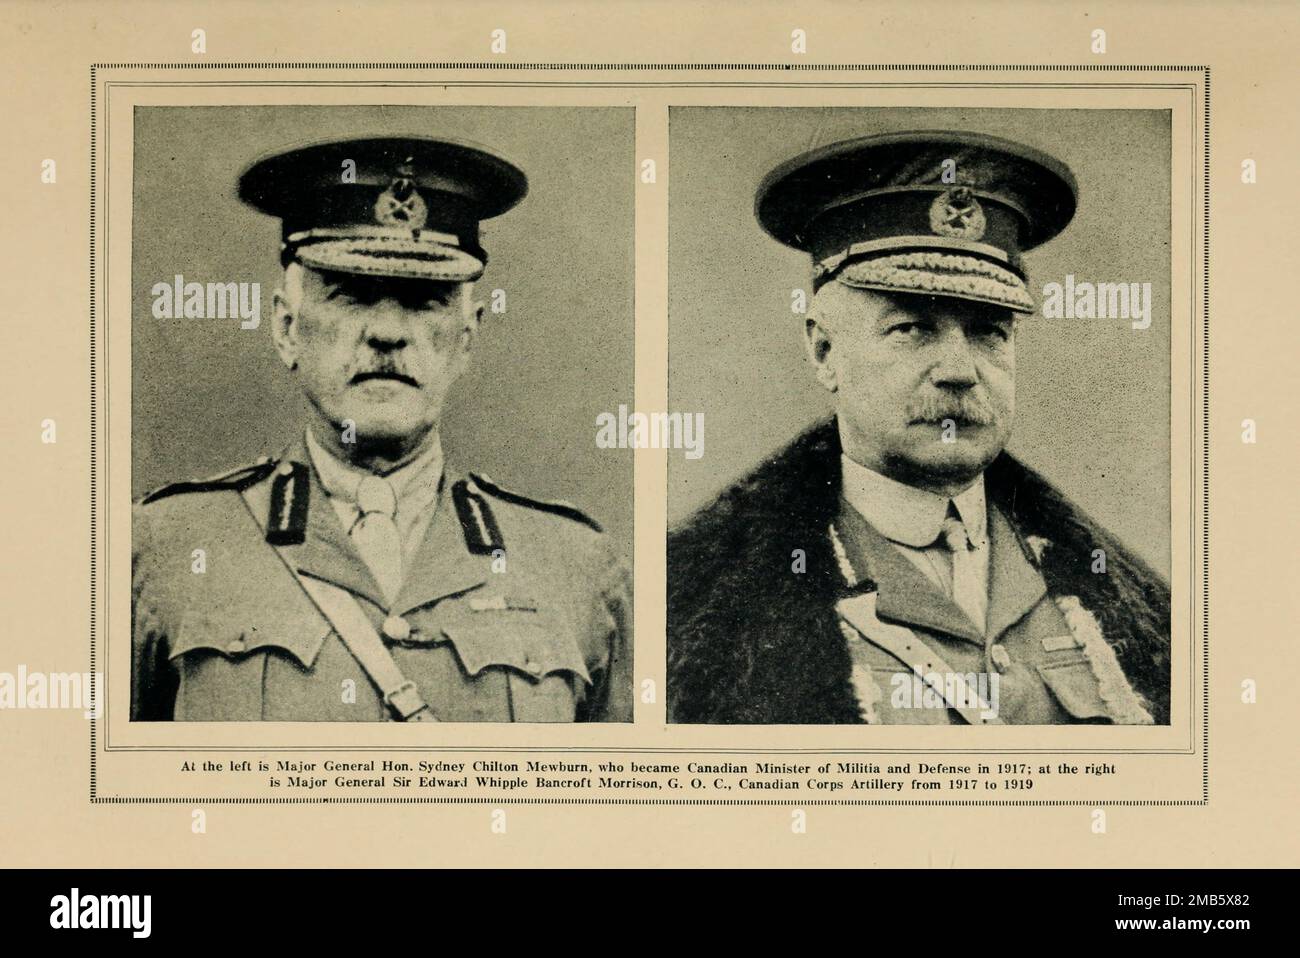 Major General Hon. Sydney Chilton Mewburn [Left] Major General Sir Edward Whipple Bancroft Morrison [Right] from the book The story of the great war; the complete historical records of events to date DIPLOMATIC AND STATE PAPERS by Reynolds, Francis Joseph, 1867-1937; Churchill, Allen Leon; Miller, Francis Trevelyan, 1877-1959; Wood, Leonard, 1860-1927; Knight, Austin Melvin, 1854-1927; Palmer, Frederick, 1873-1958; Simonds, Frank Herbert, 1878-; Ruhl, Arthur Brown, 1876-  Volume VII Published 1920 Stock Photo